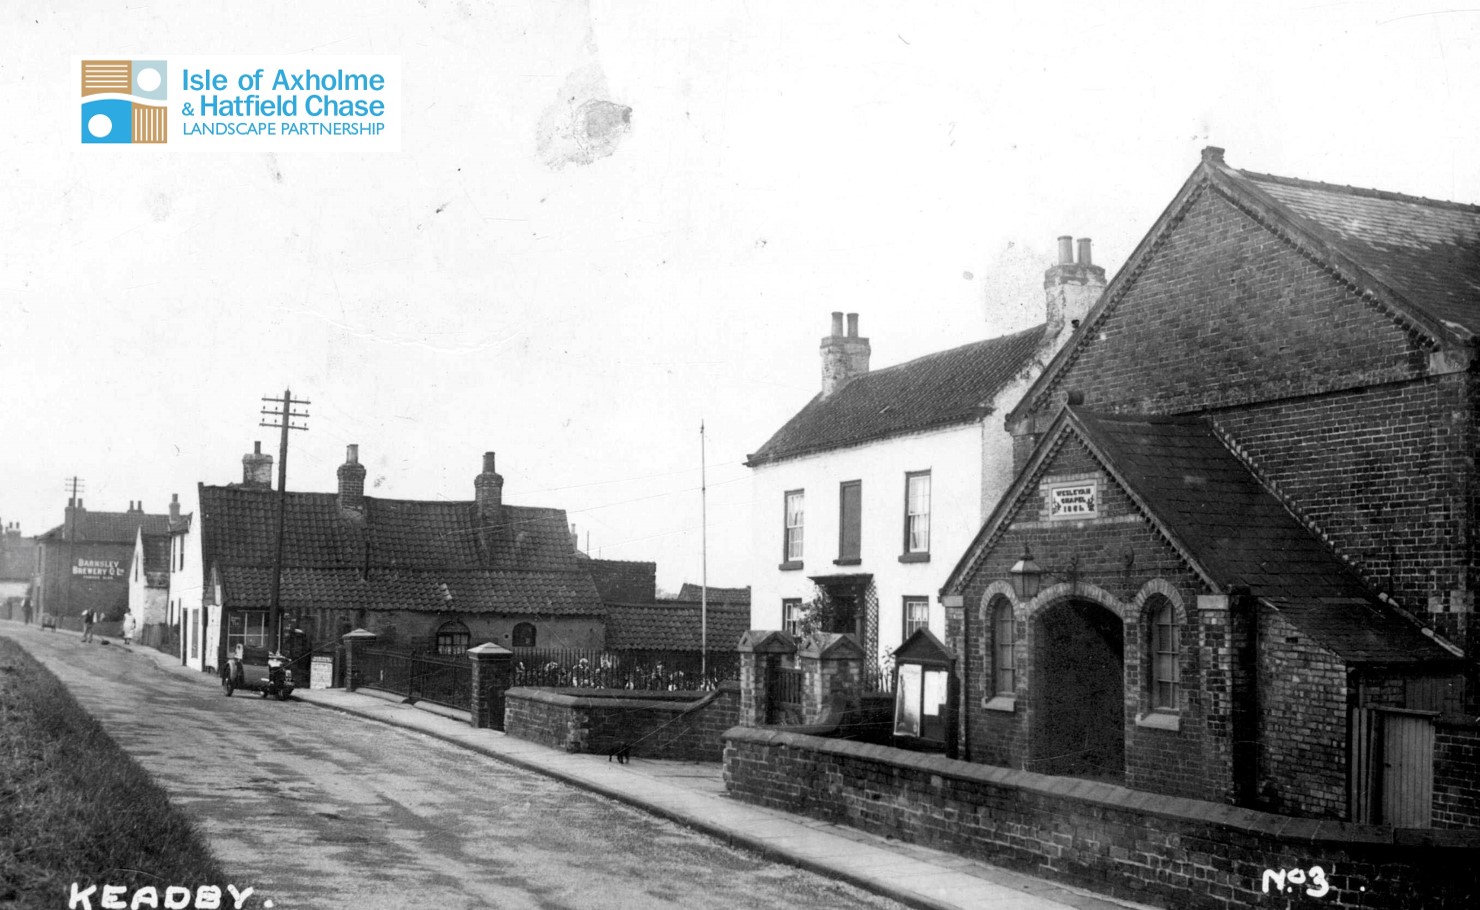 Photo taken circa 1937 showing the view of the street along the Trentside at Keadby